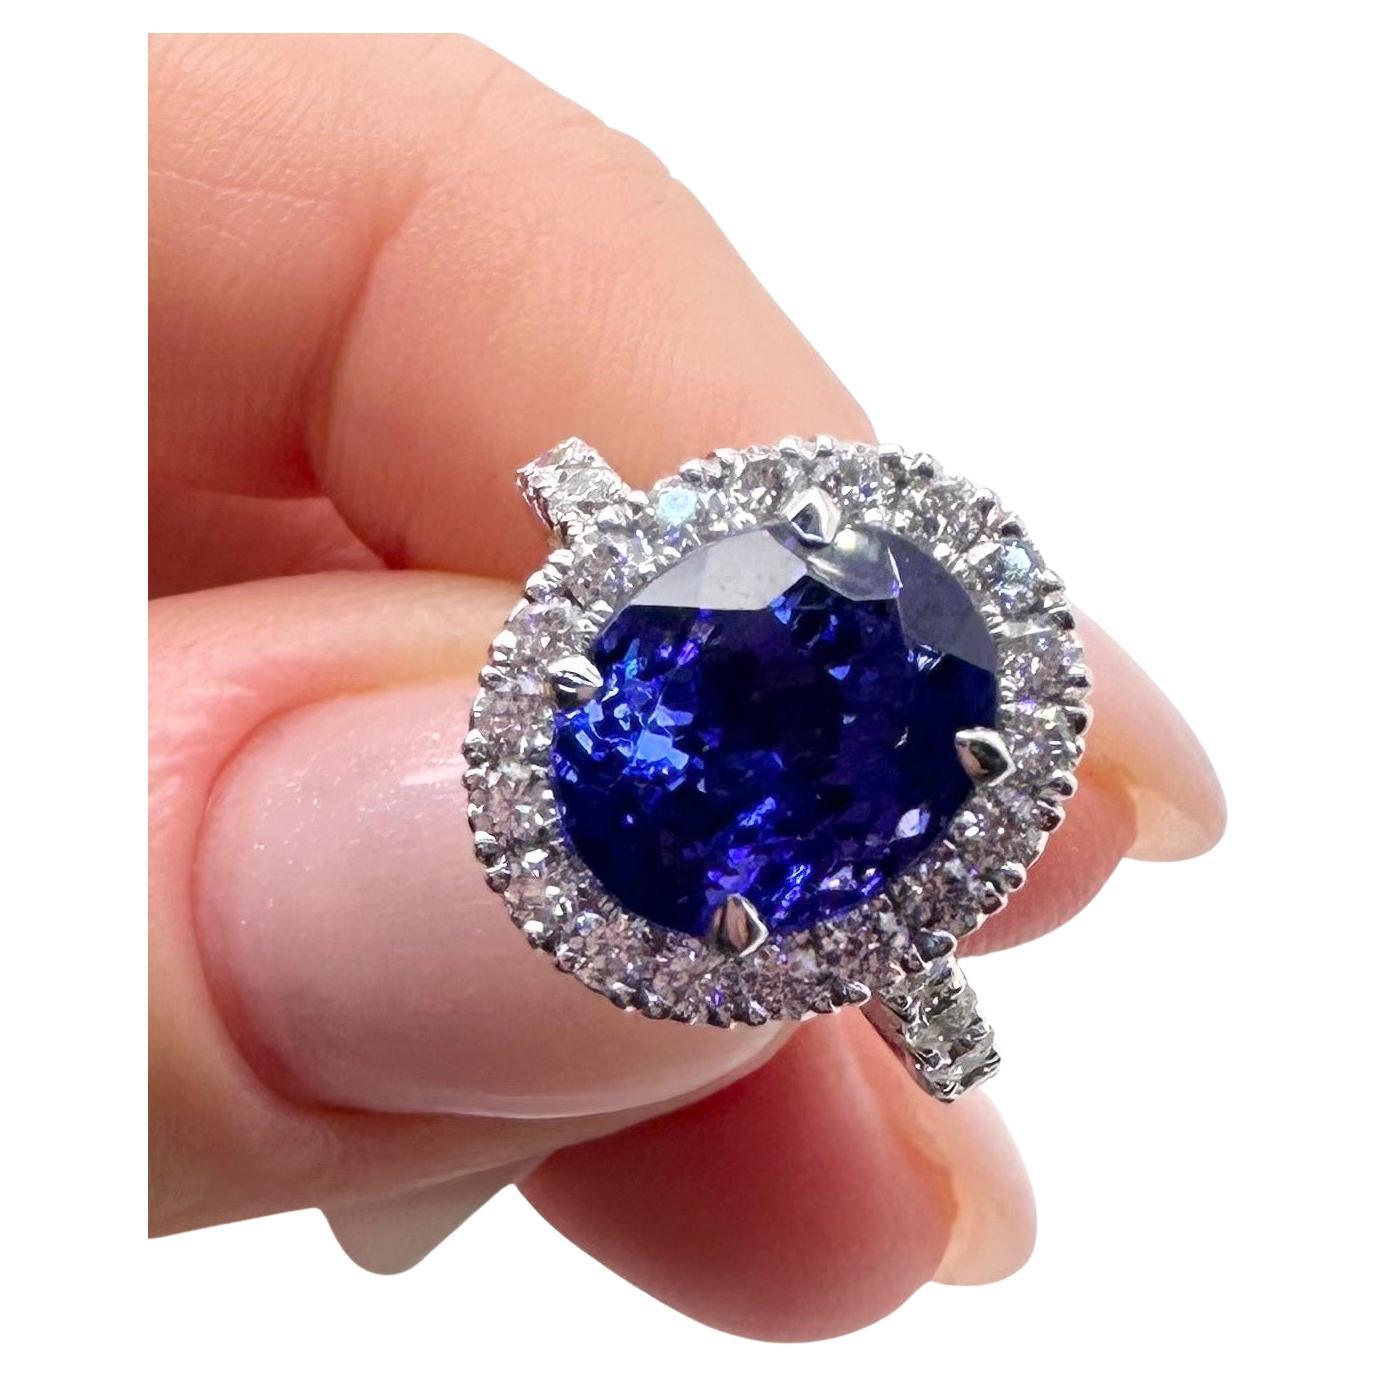 Tanzanite engagement ring in 14KT white gold